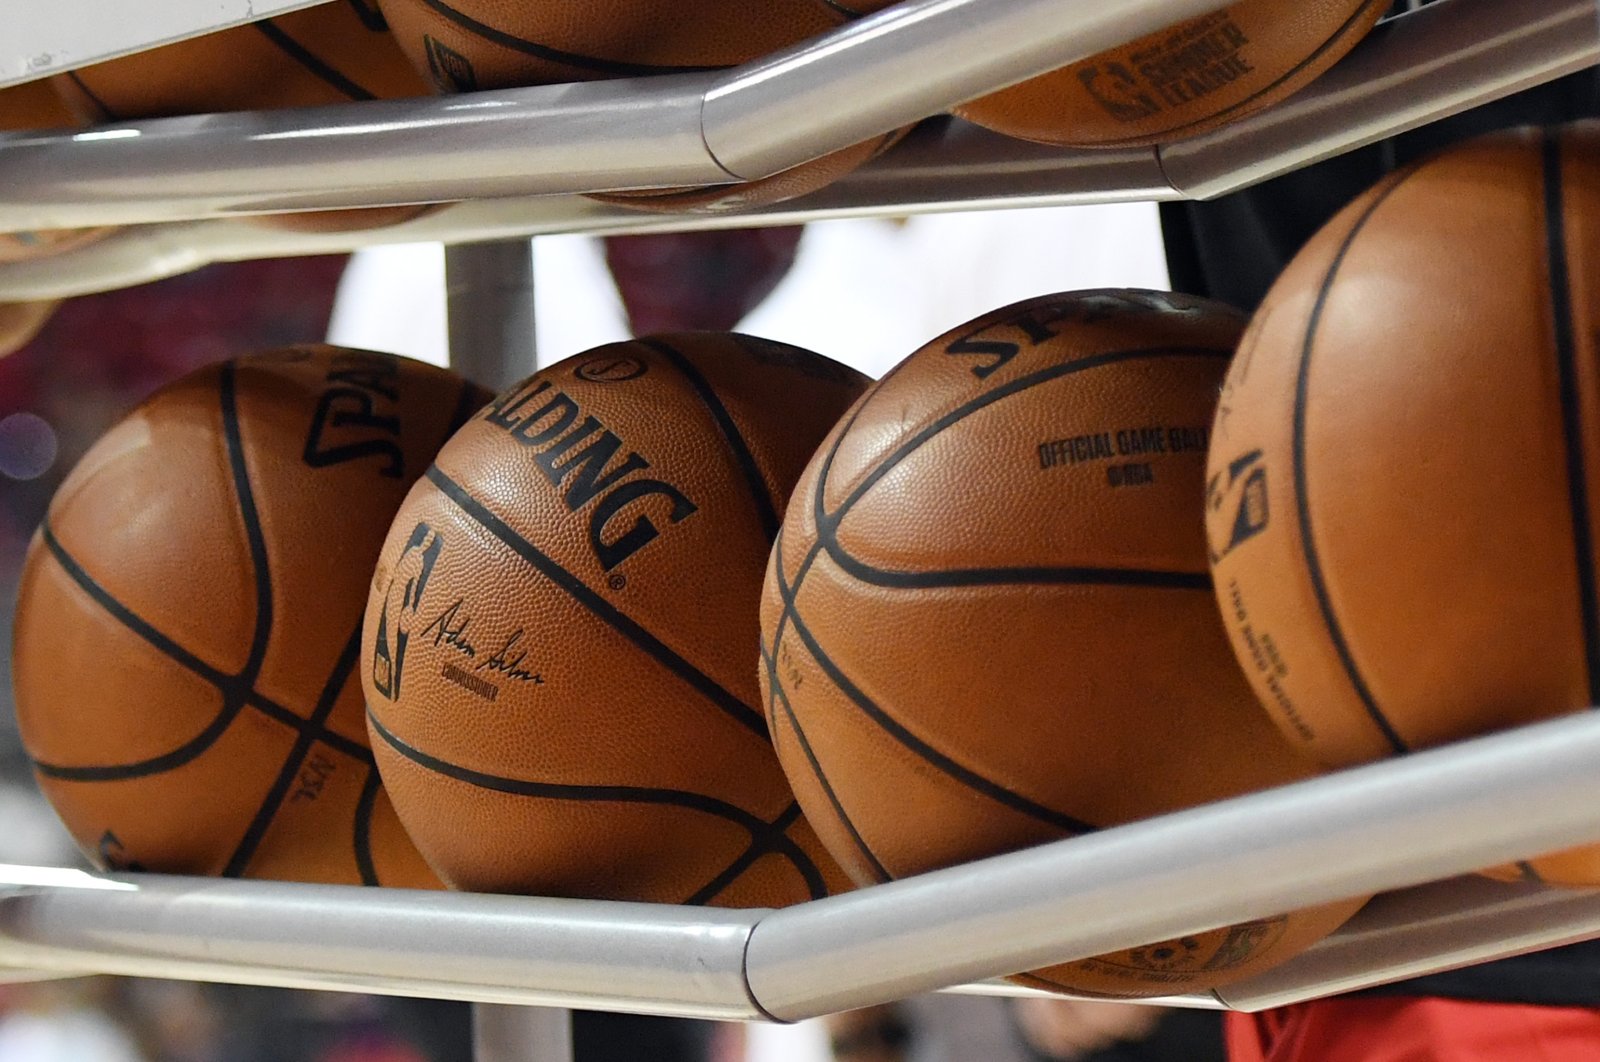 Basketballs lay in a ball rack before a game between the Washington Wizards and the New Orleans Pelicans during the 2019 NBA Summer League at the Thomas & Mack Center in Las Vegas, Nevada, U.S., July 5, 2019. (AFP Photo)